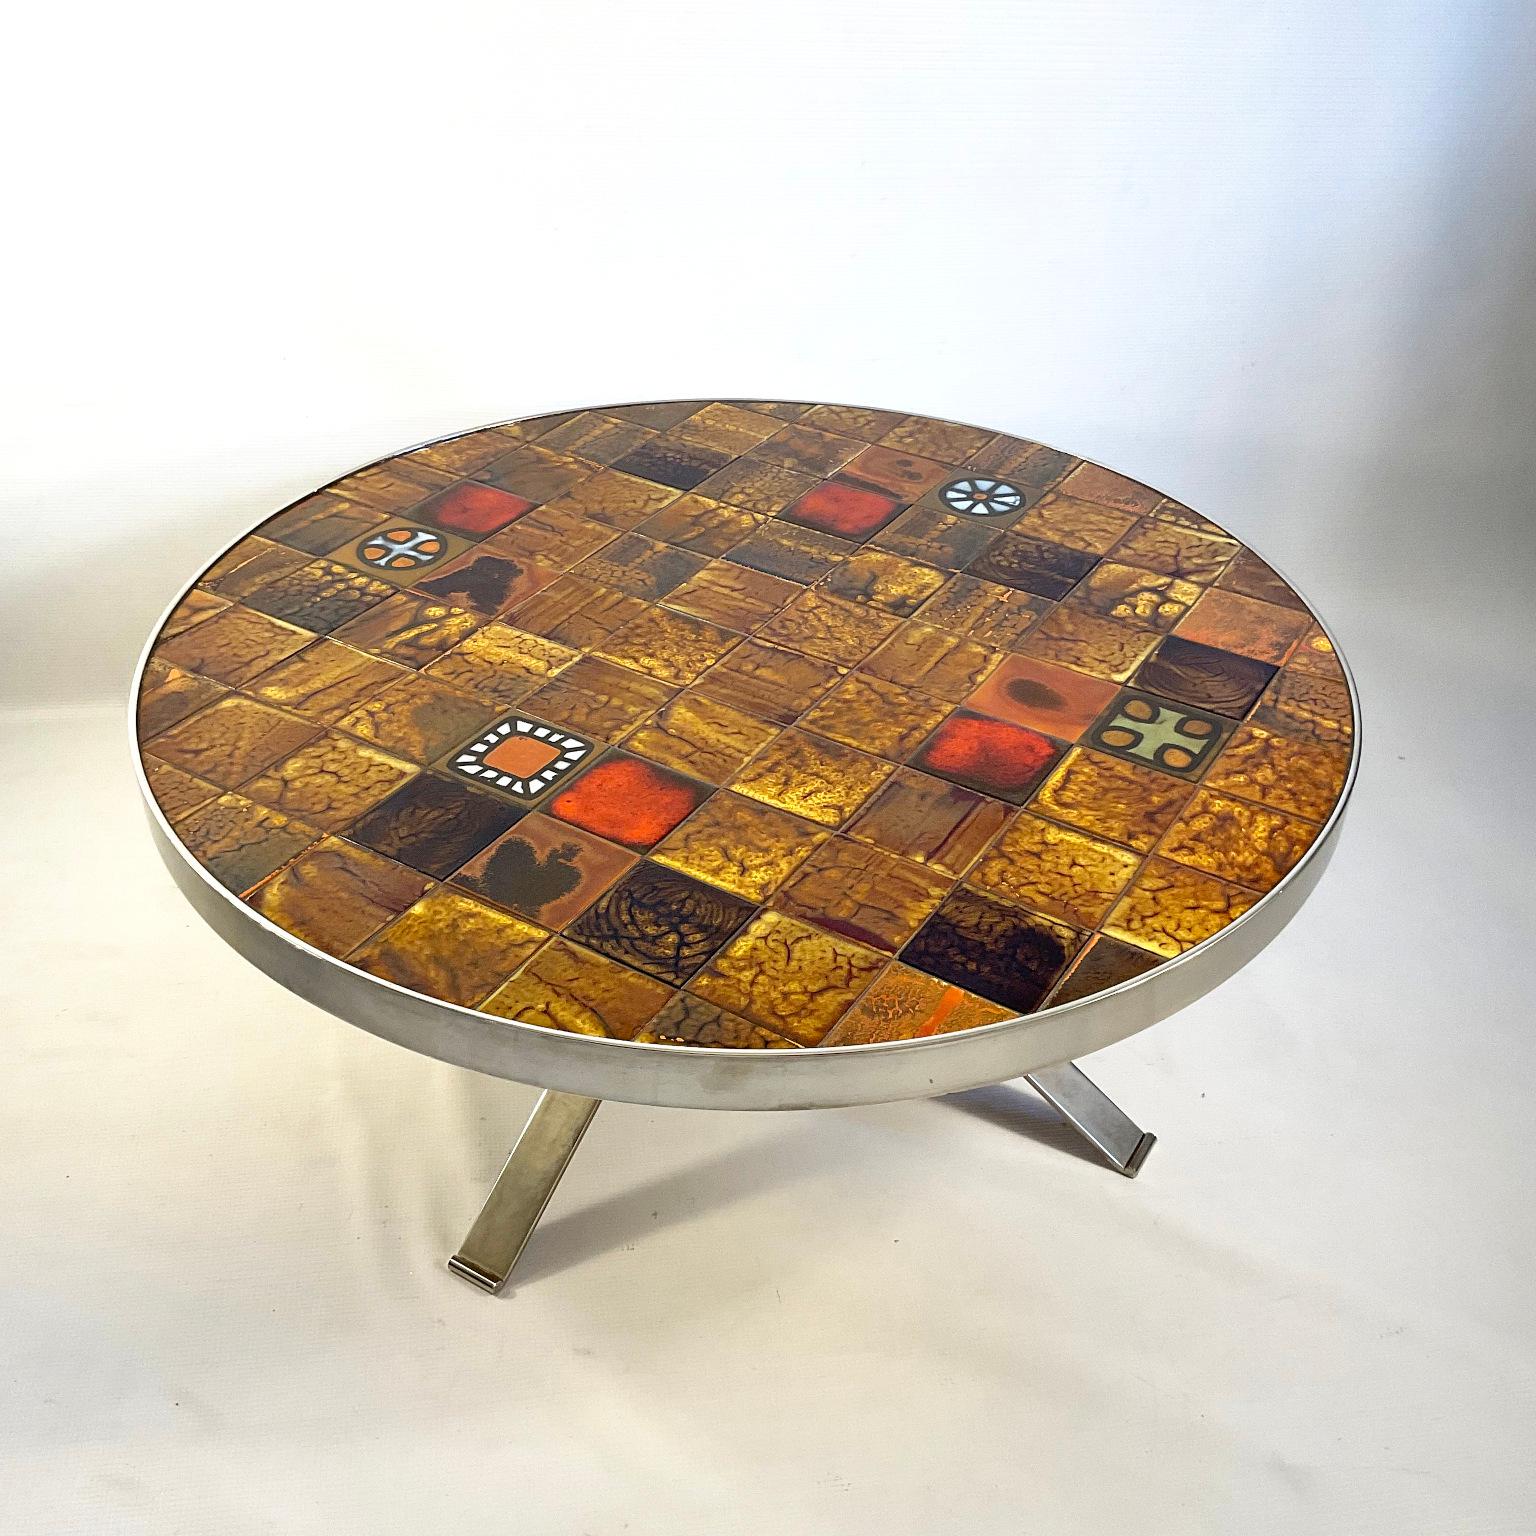 Large Roche Bobois round coffee table from the 1970s, nickel-plated metal structure and artisanal ceramic tiles on top.
